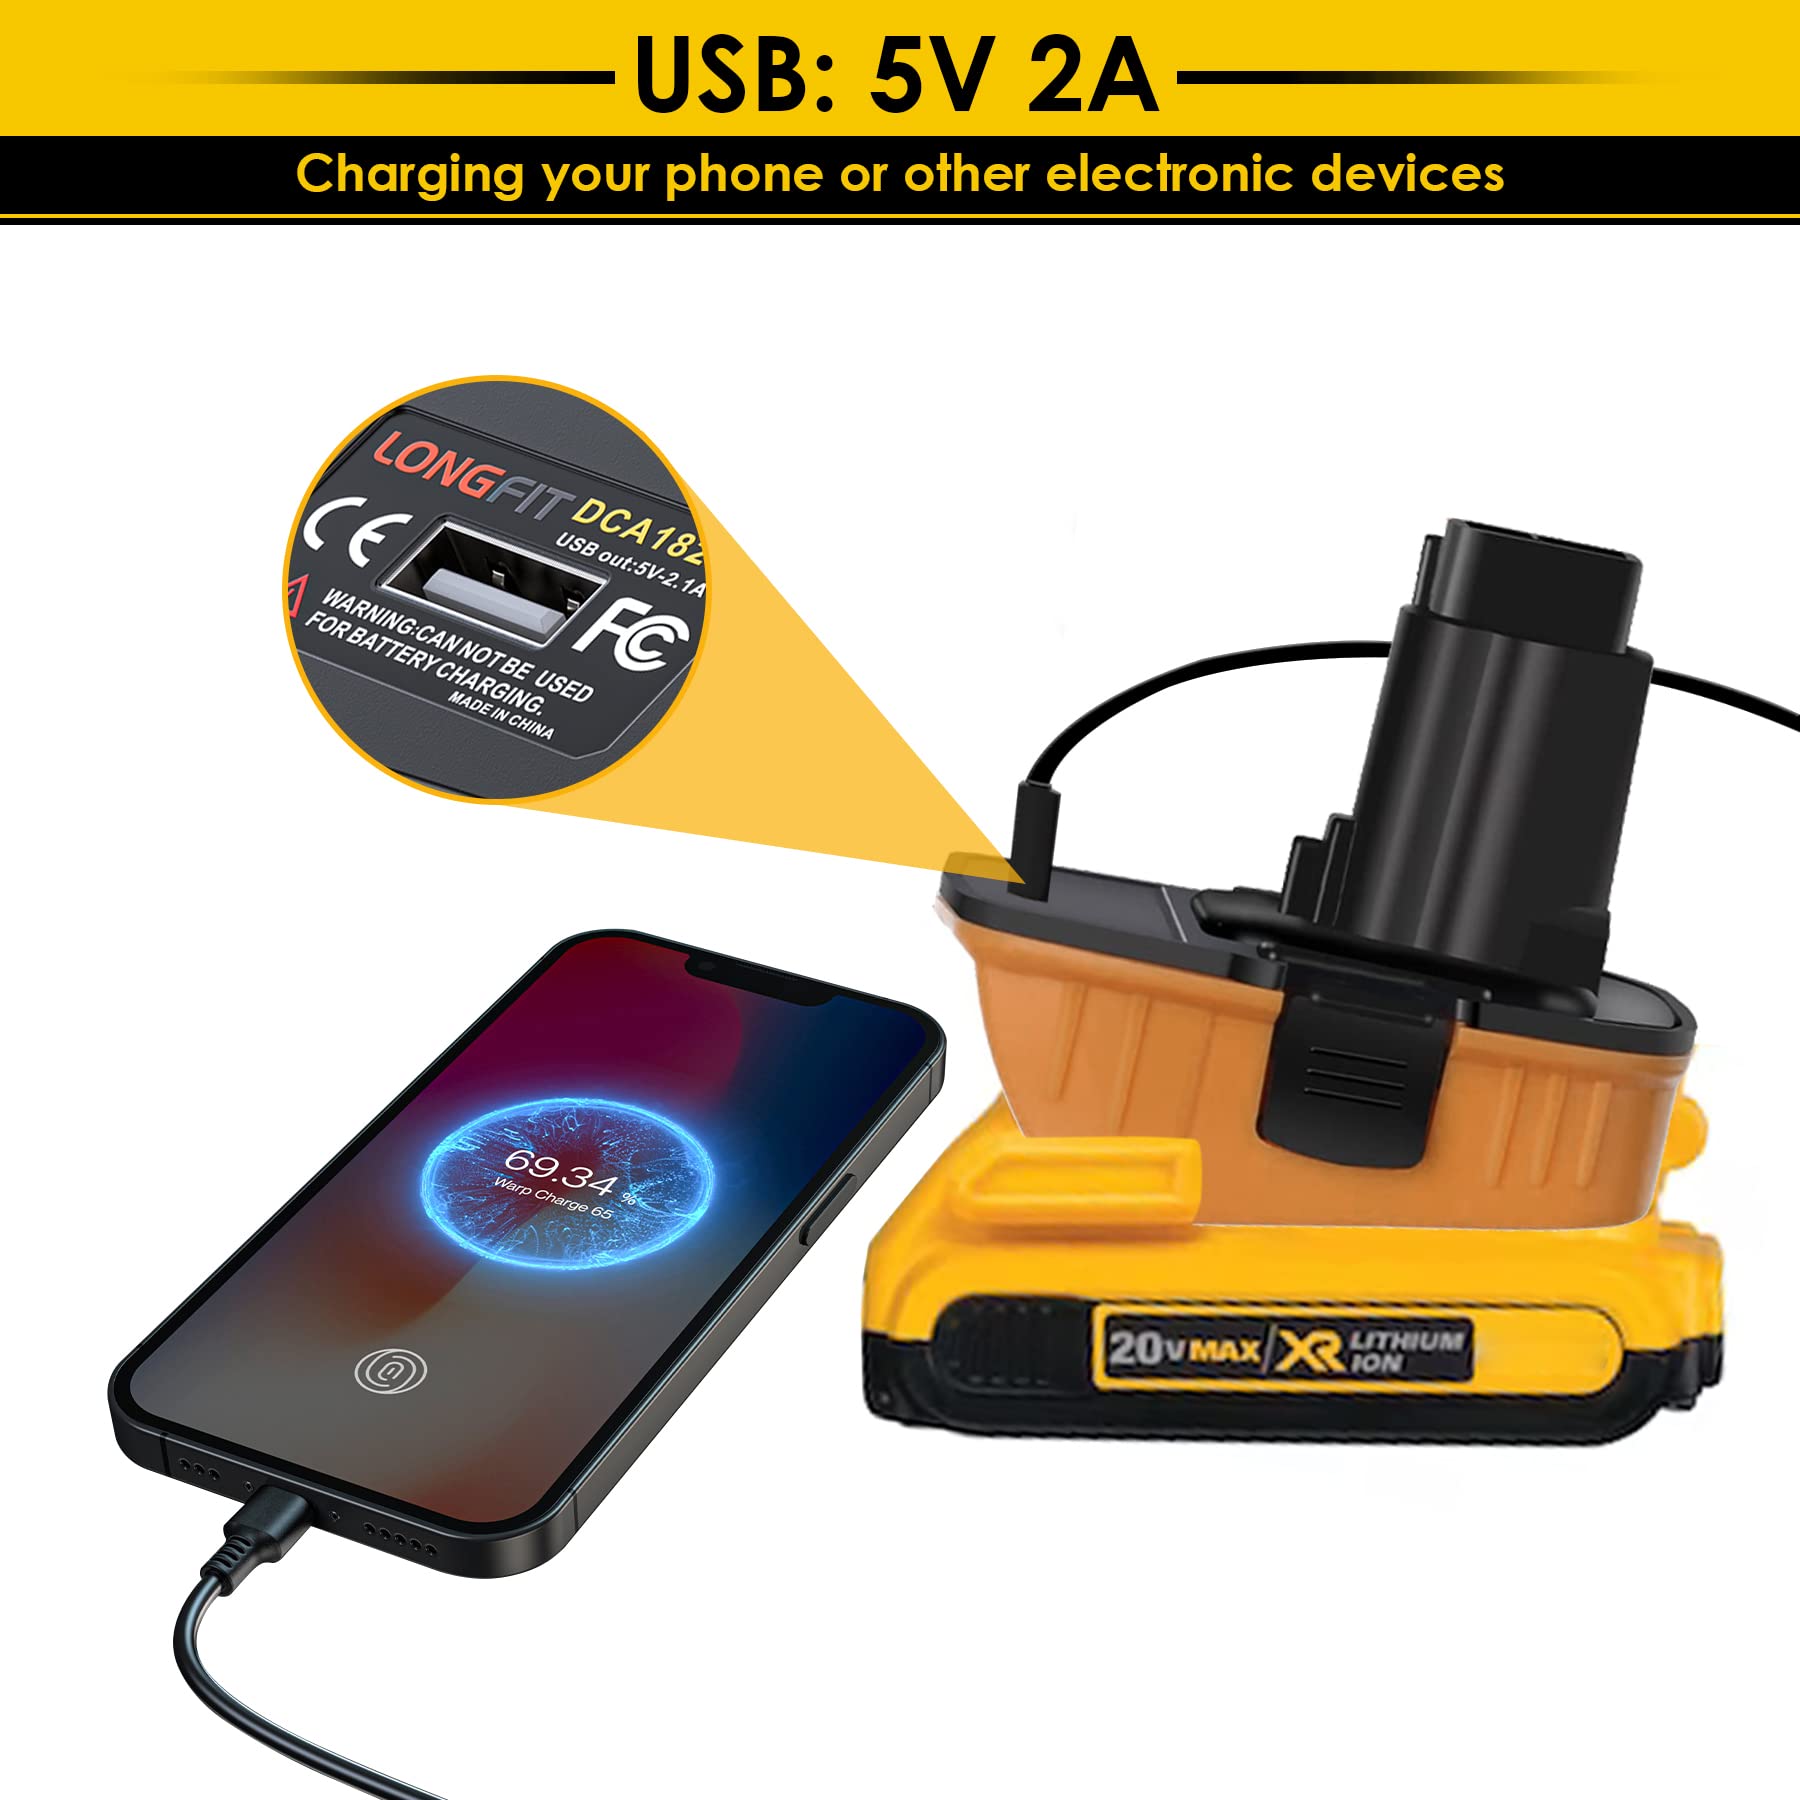 Replace for DeWalt Battery Adapter 18V to 20V DCA1820, Convert 20V Lithium Battery to 18V NiCad & NiMh Battery DC9096 DC9098 DC9099 DW9098 DW9096, with 5V USB Port, for Drills, Sanders and More